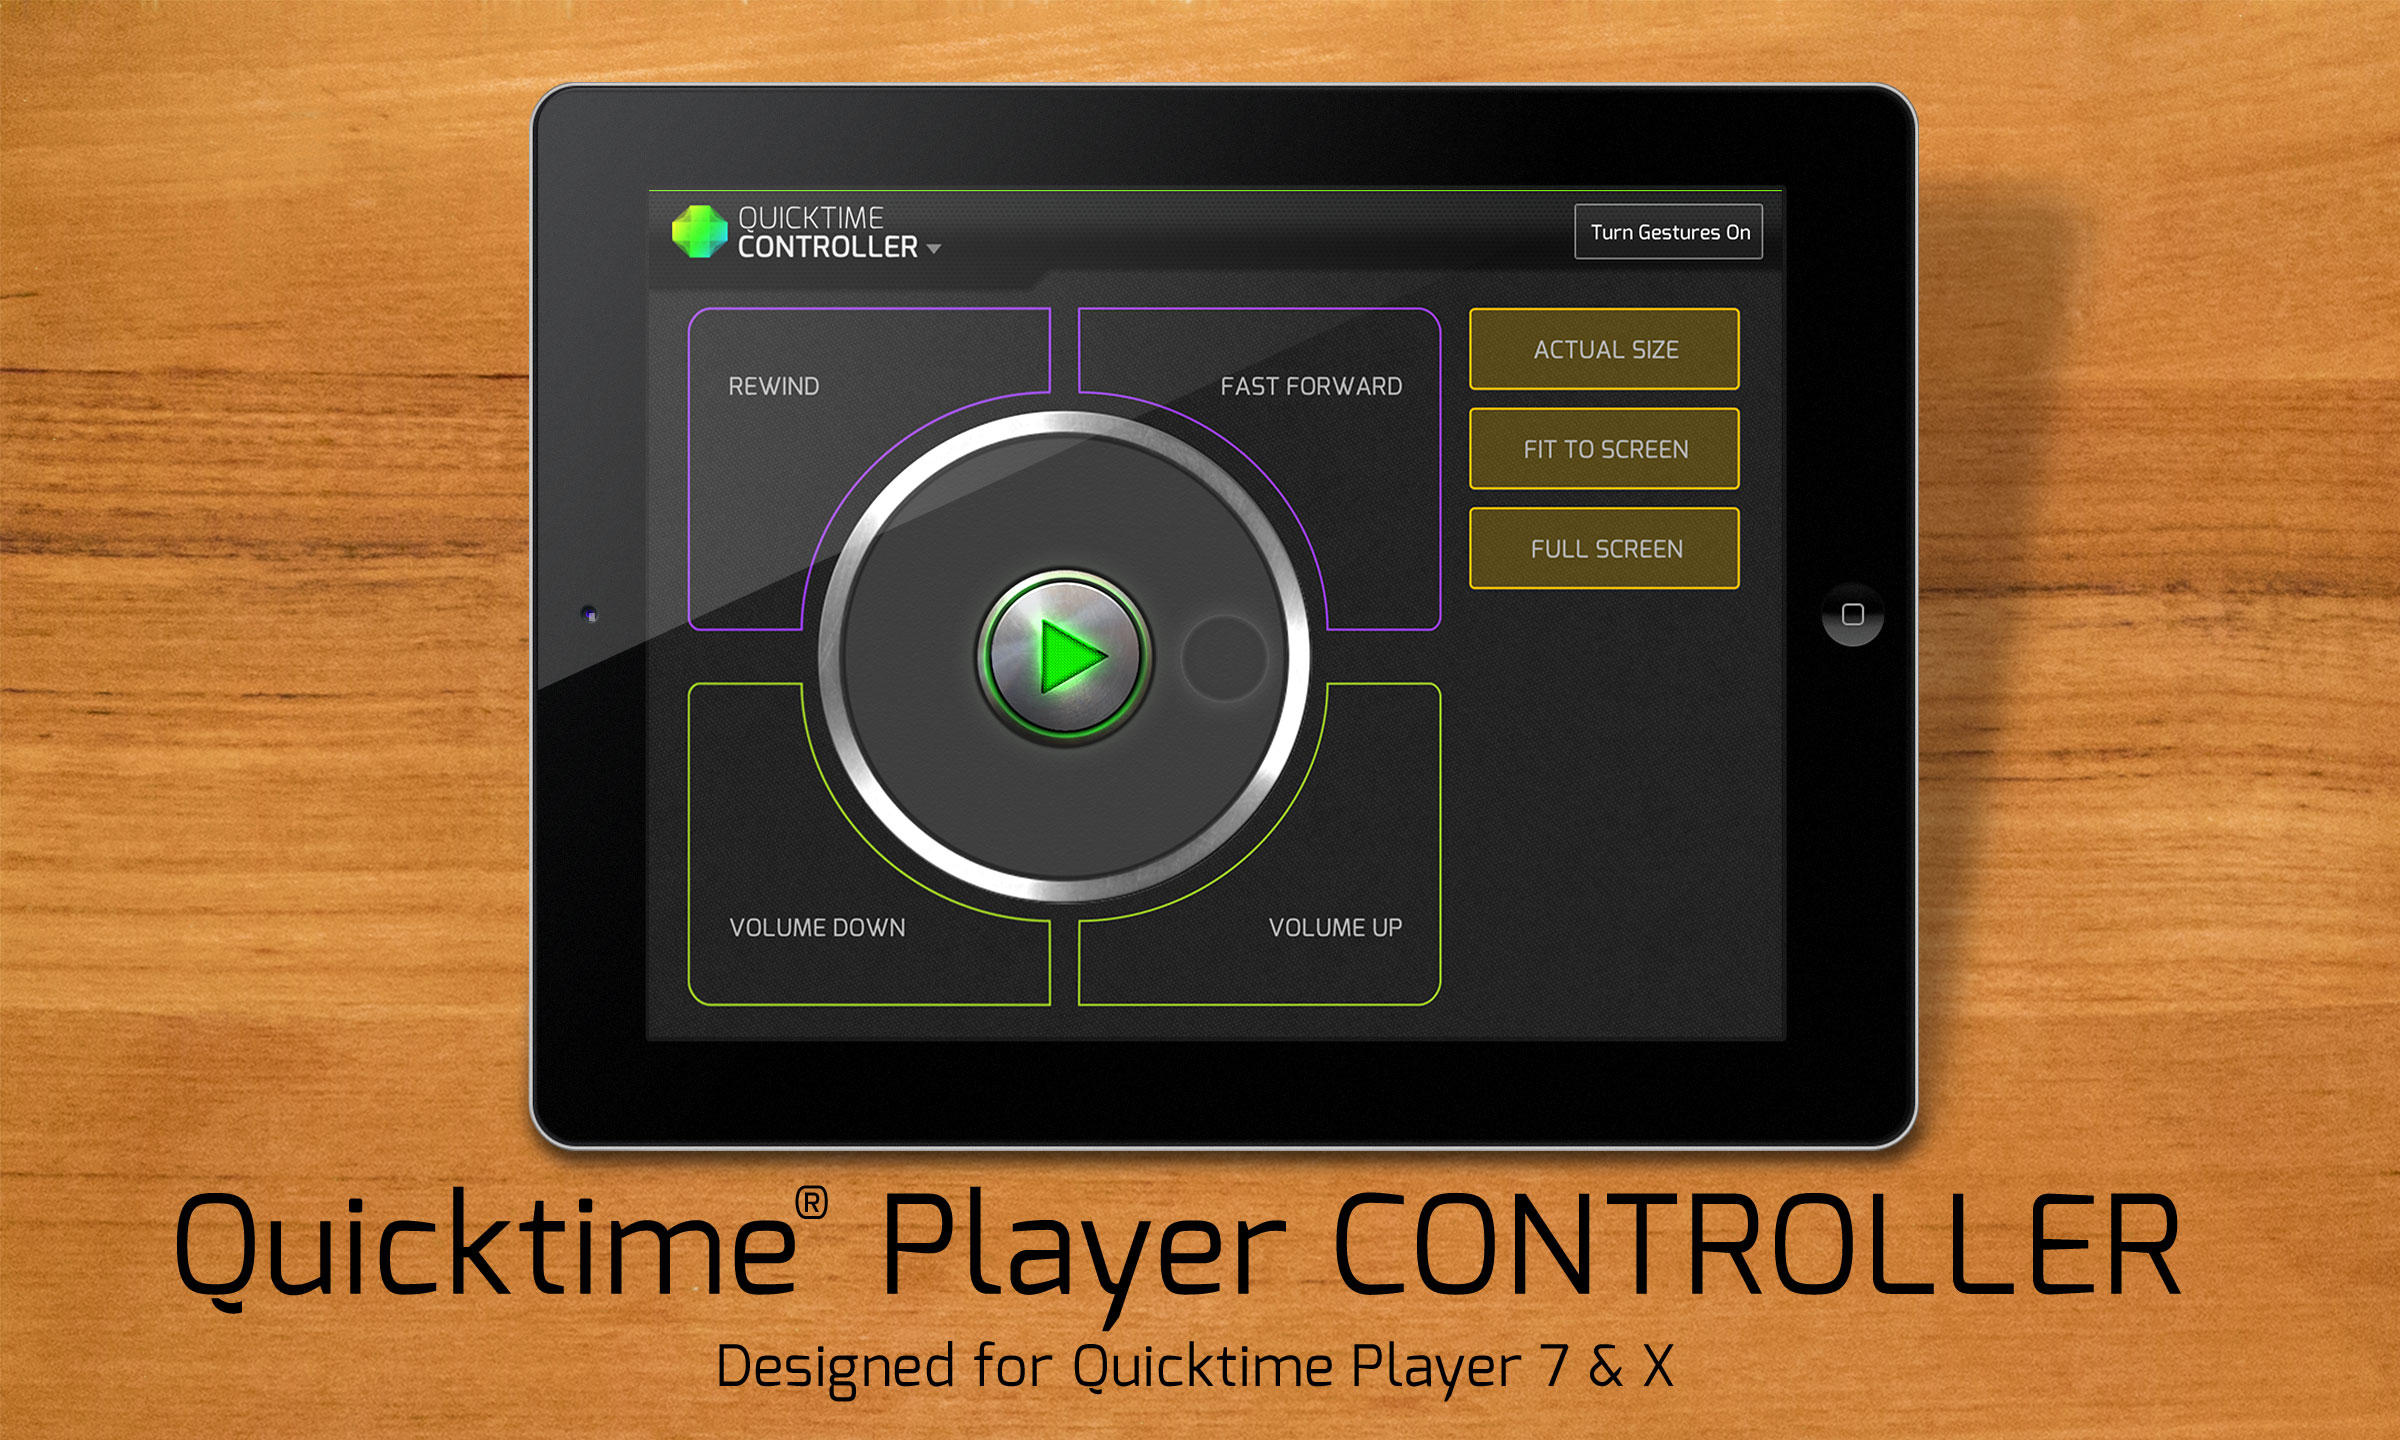 Console: Quicktime CONTROLLER